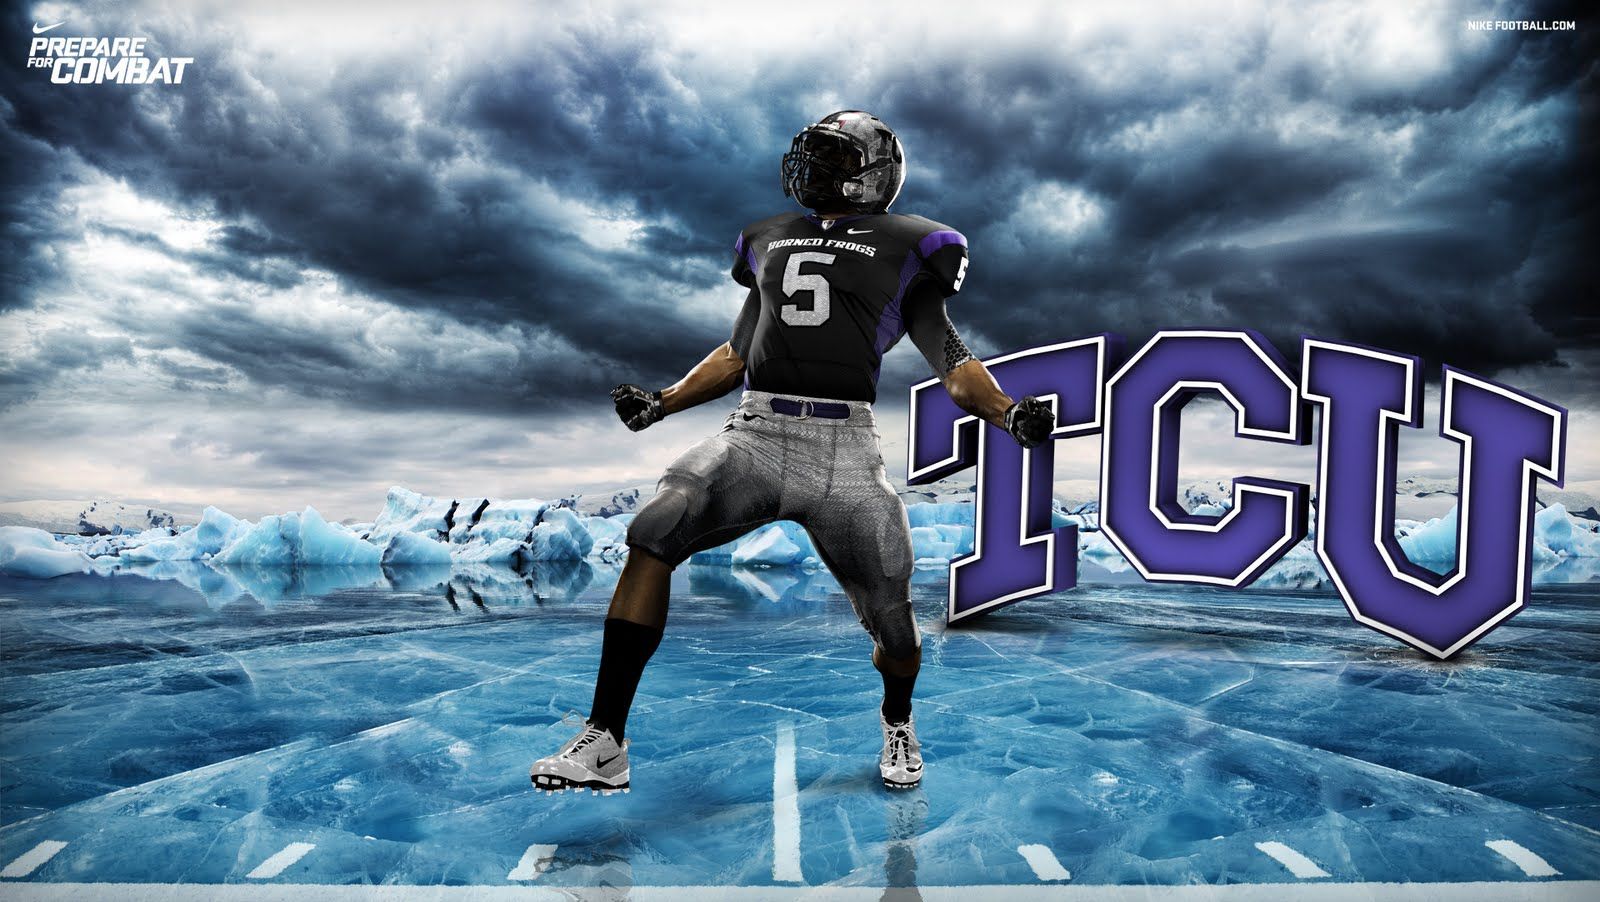 TCU should have gone here. Tcu horned frogs, Horned frogs, Tcu football